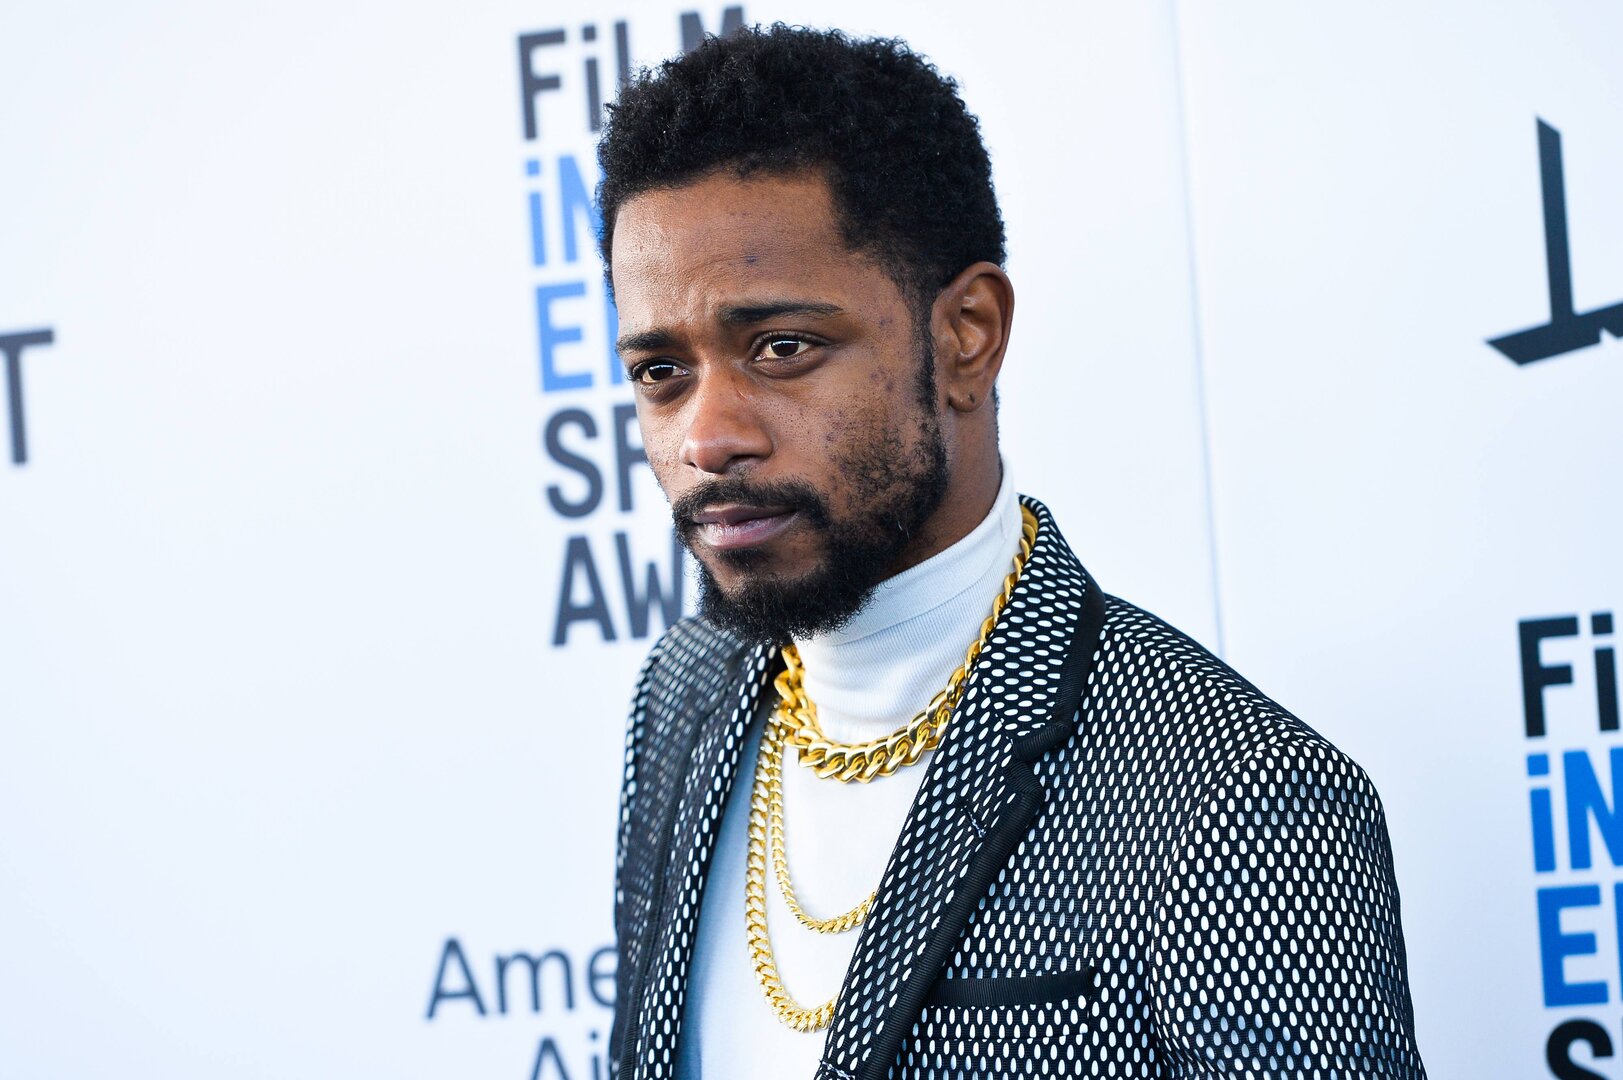 LaKeith Stanfield: biography, personal life, filmography.